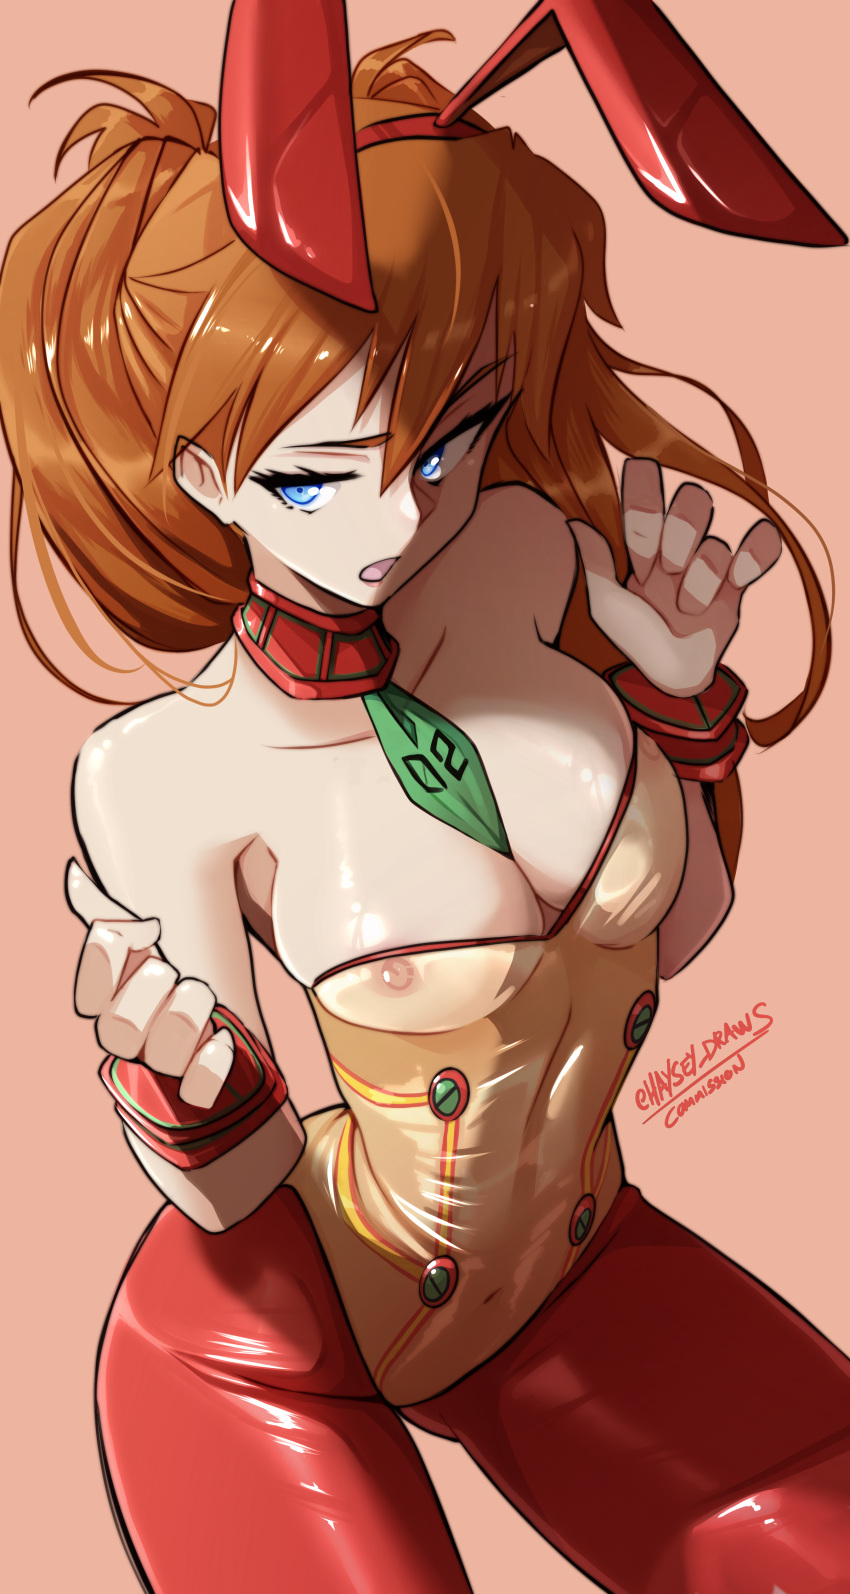 Asuka trying out cosplaying! Post By Xxx Sexy CyanideJunkie12 on ecchi